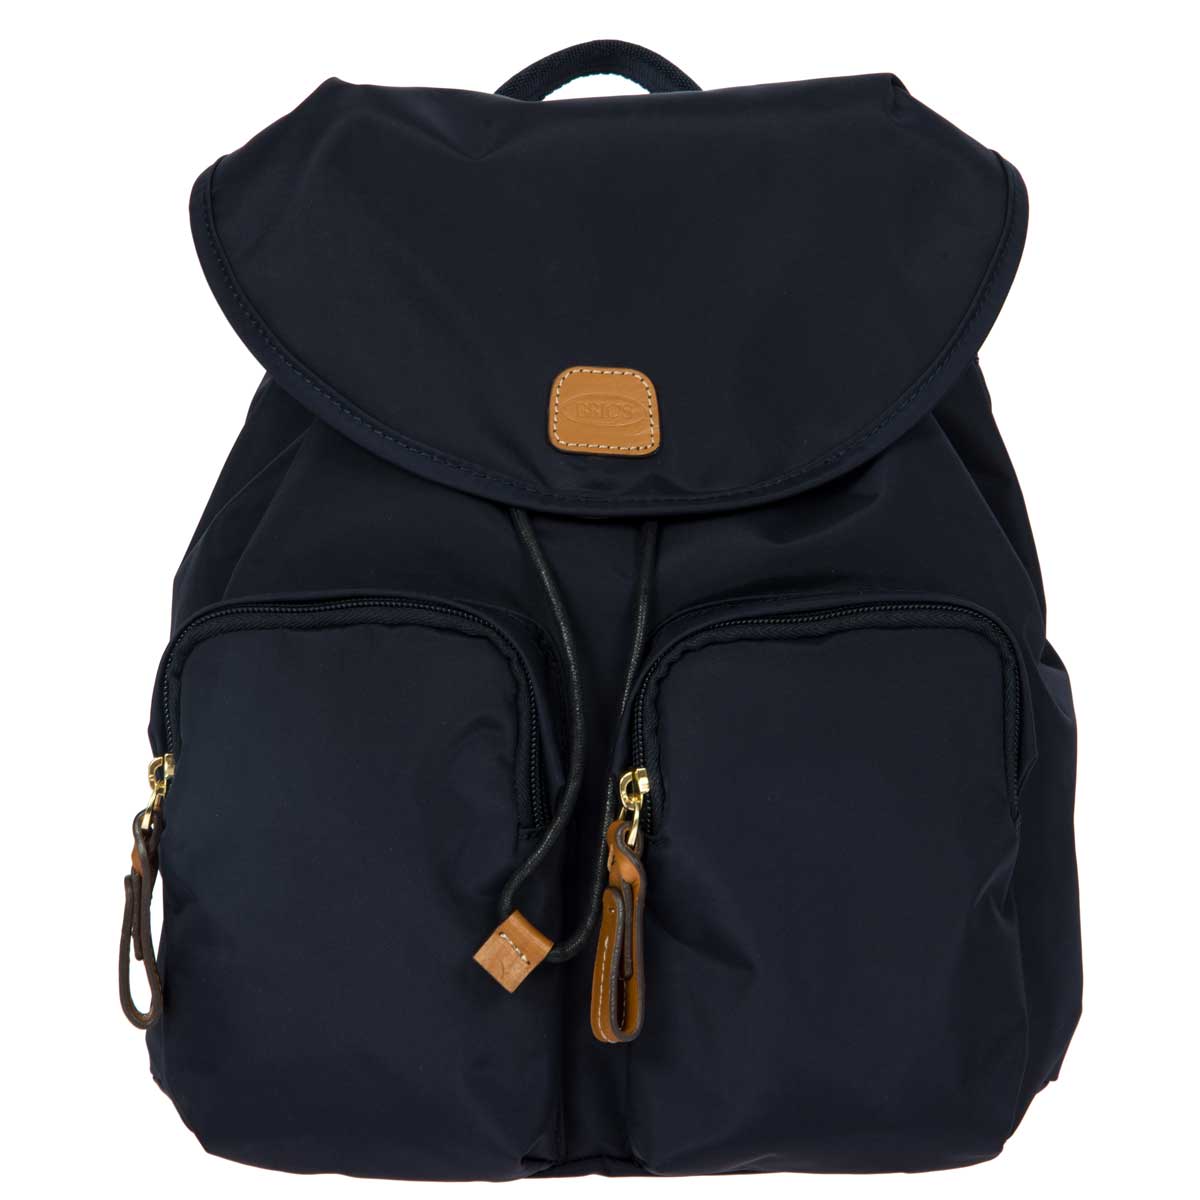 Bric's X-Bag Small City Backpack - Olive BXL43754.078